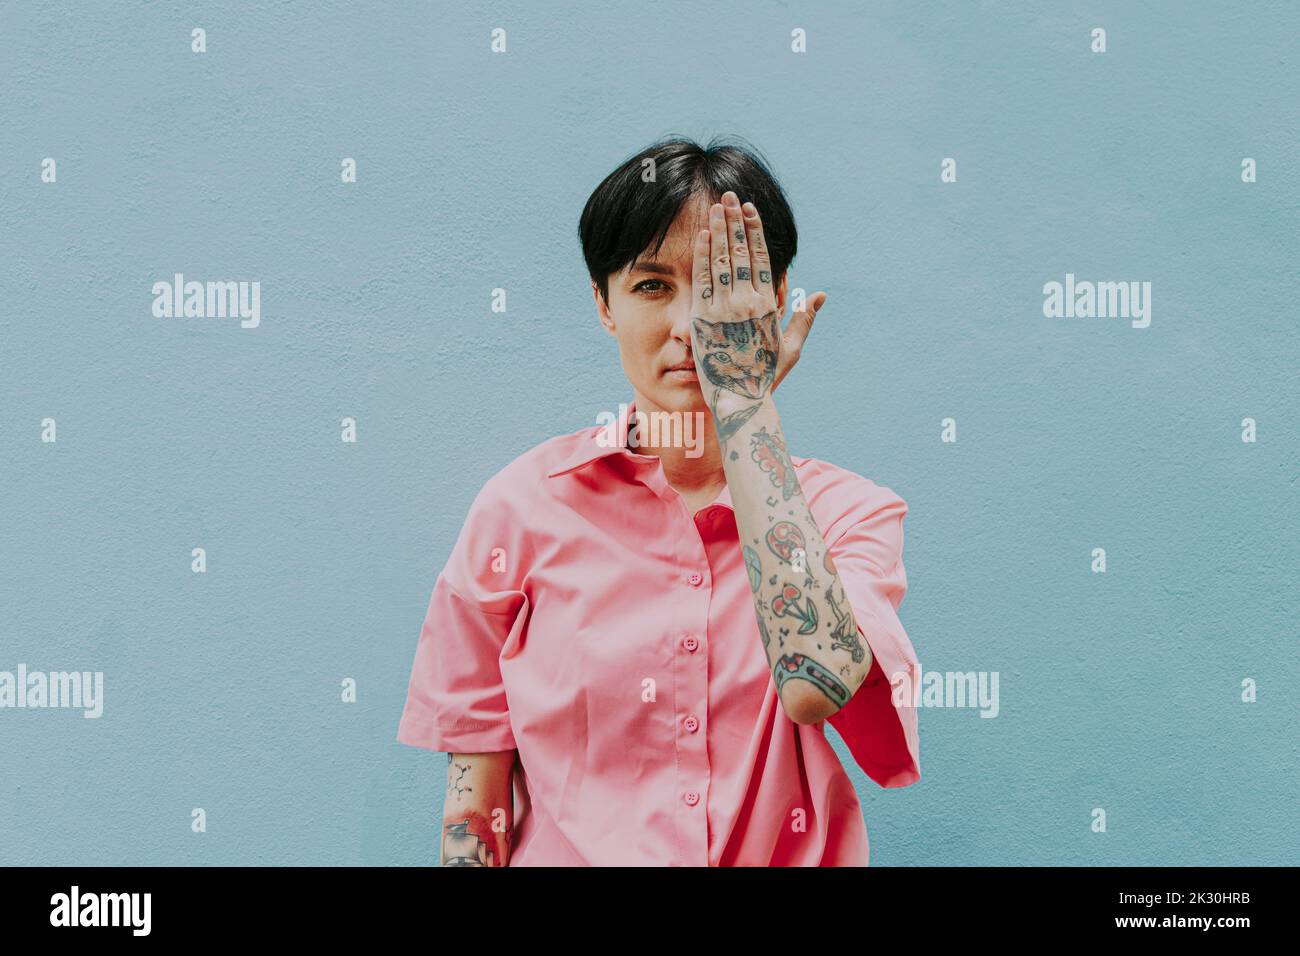 Tattooed woman covering eyes with hand standing in front of blue wall Stock Photo